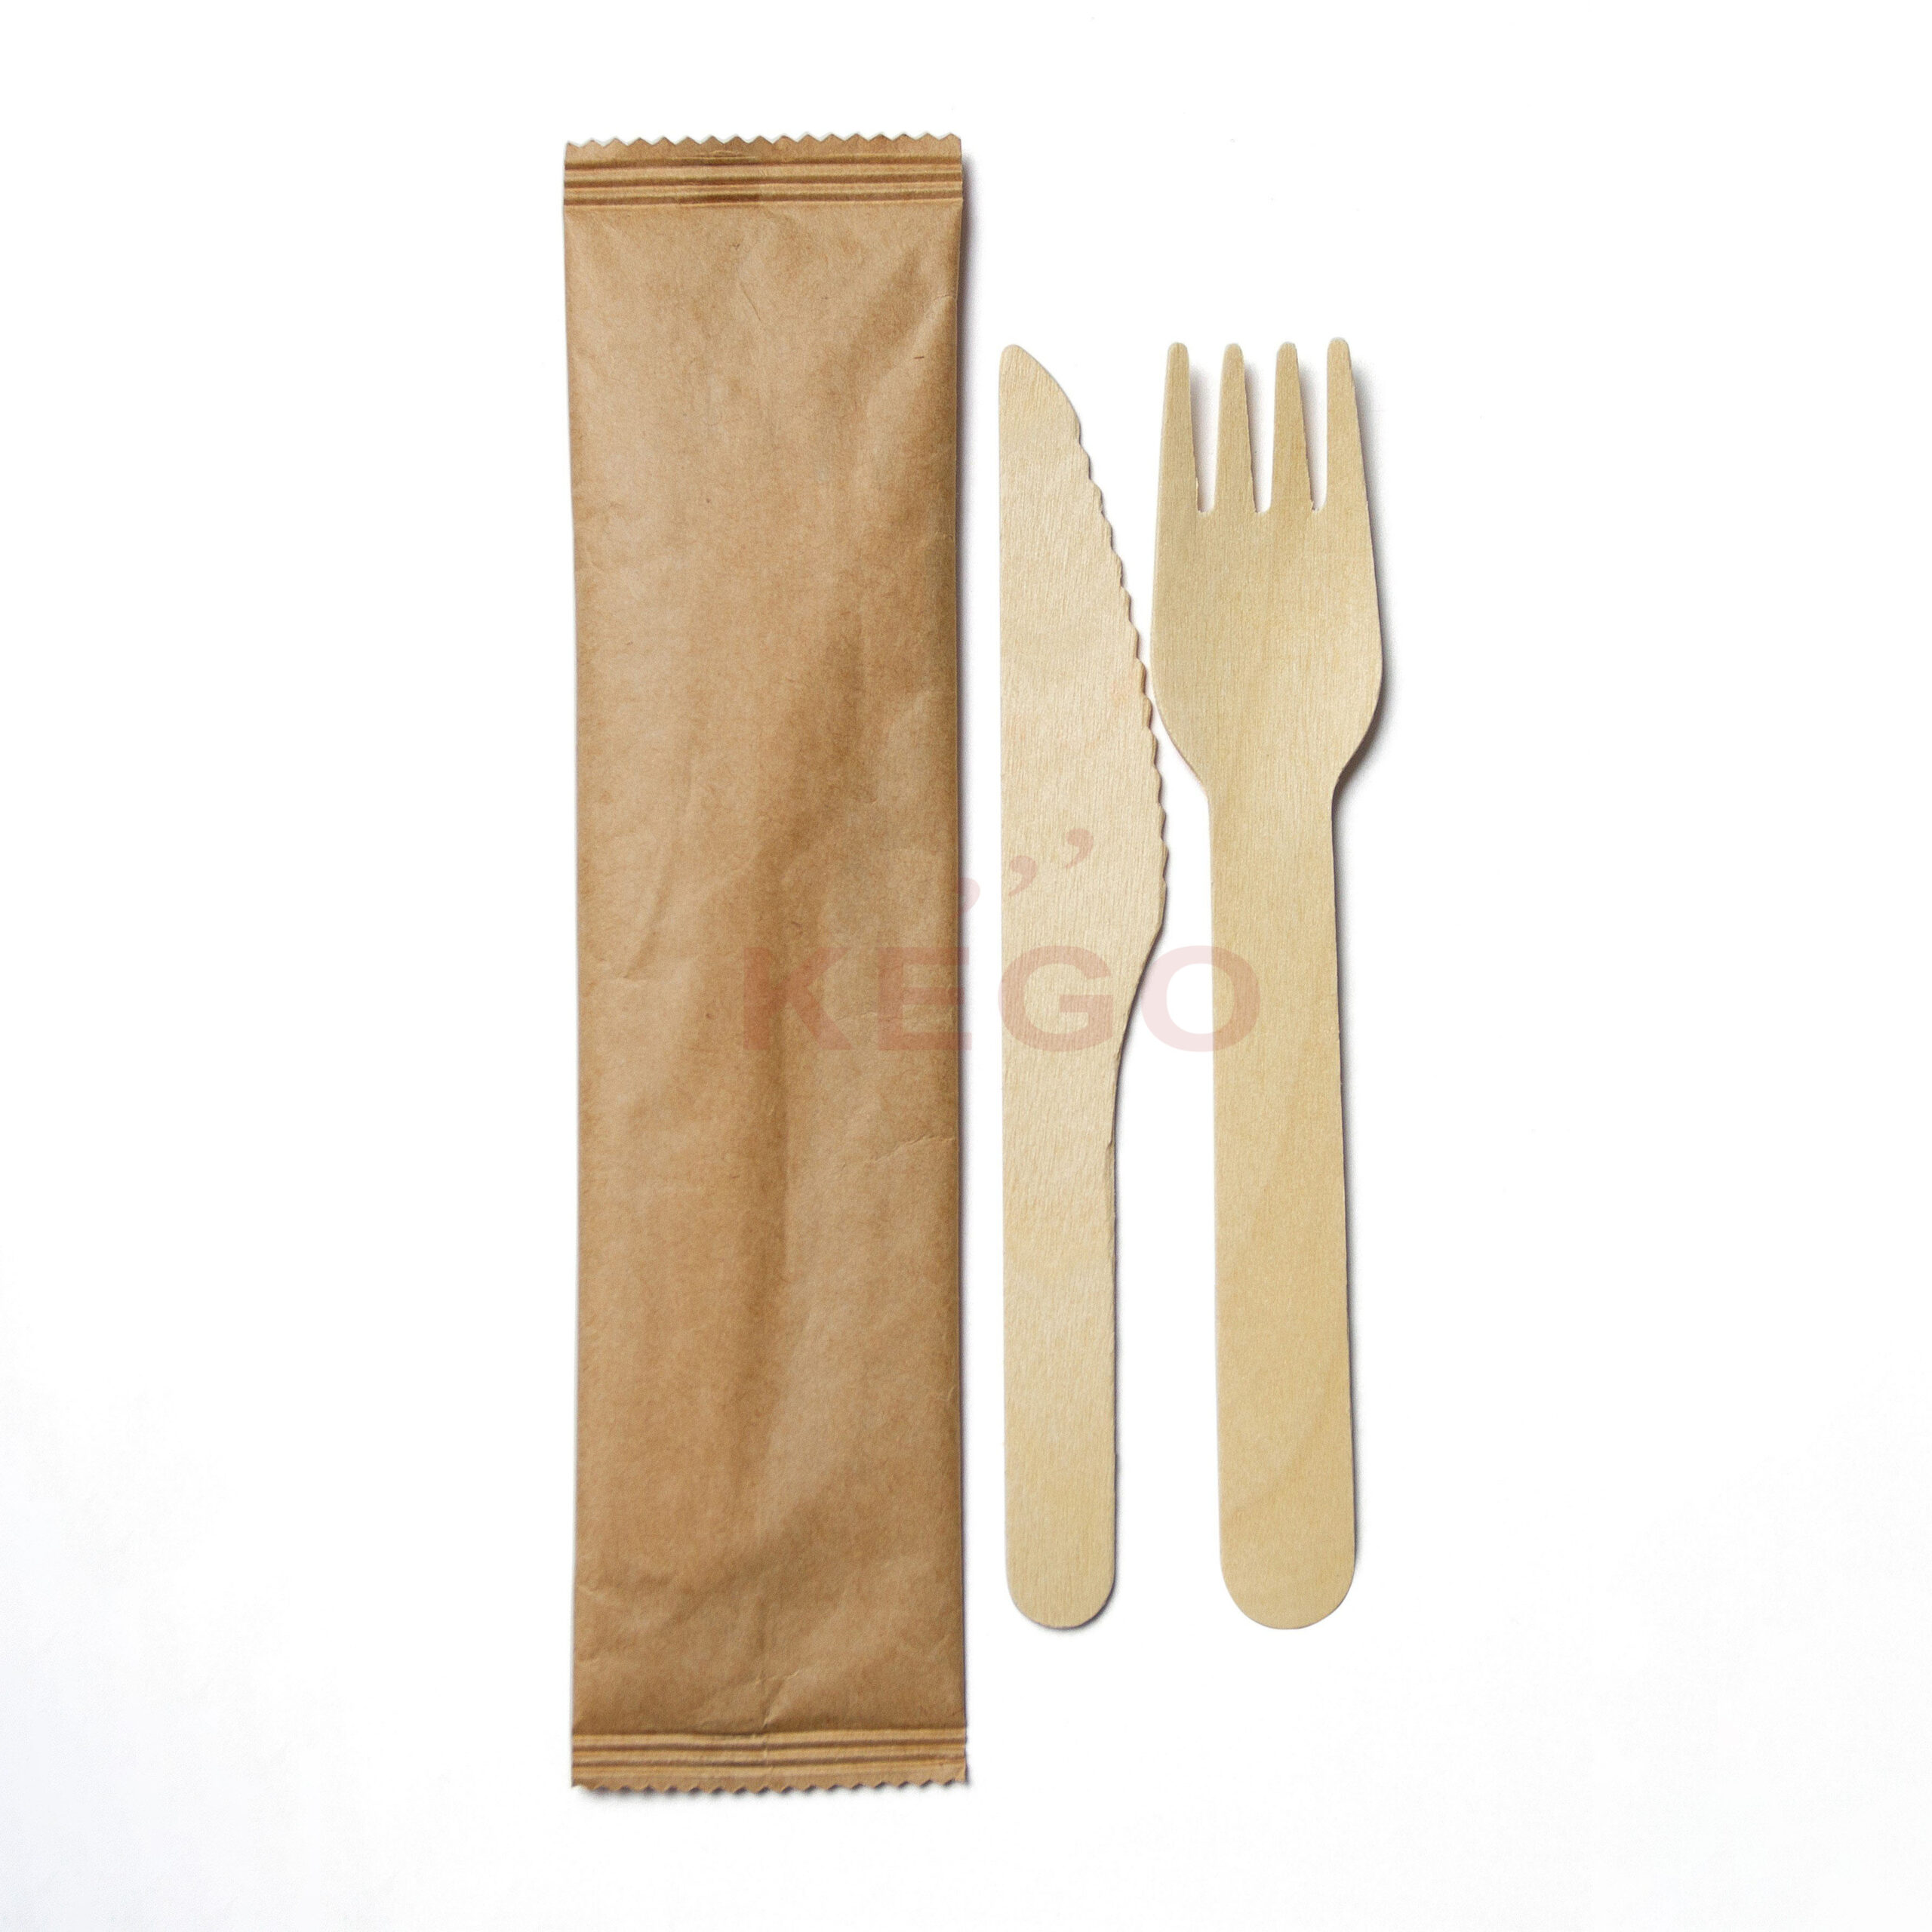 https://disposablewoodencutlery.com/wp-content/uploads/2015/09/Others-Mix-Set-1-1-scaled.jpg